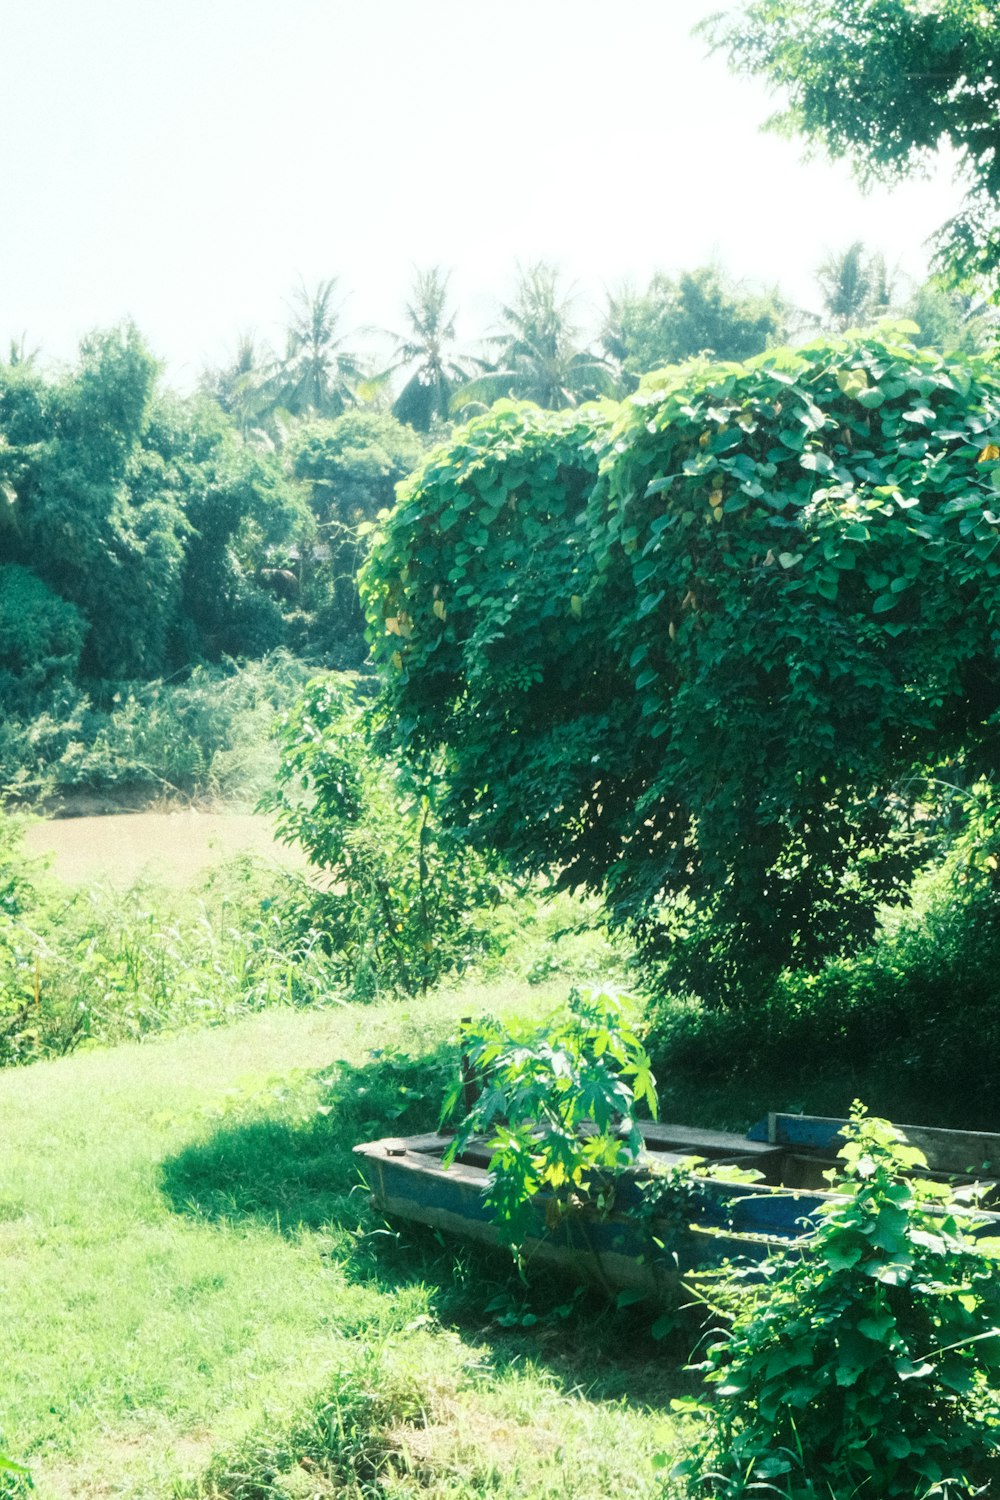 a wooden boat sitting in the middle of a lush green field